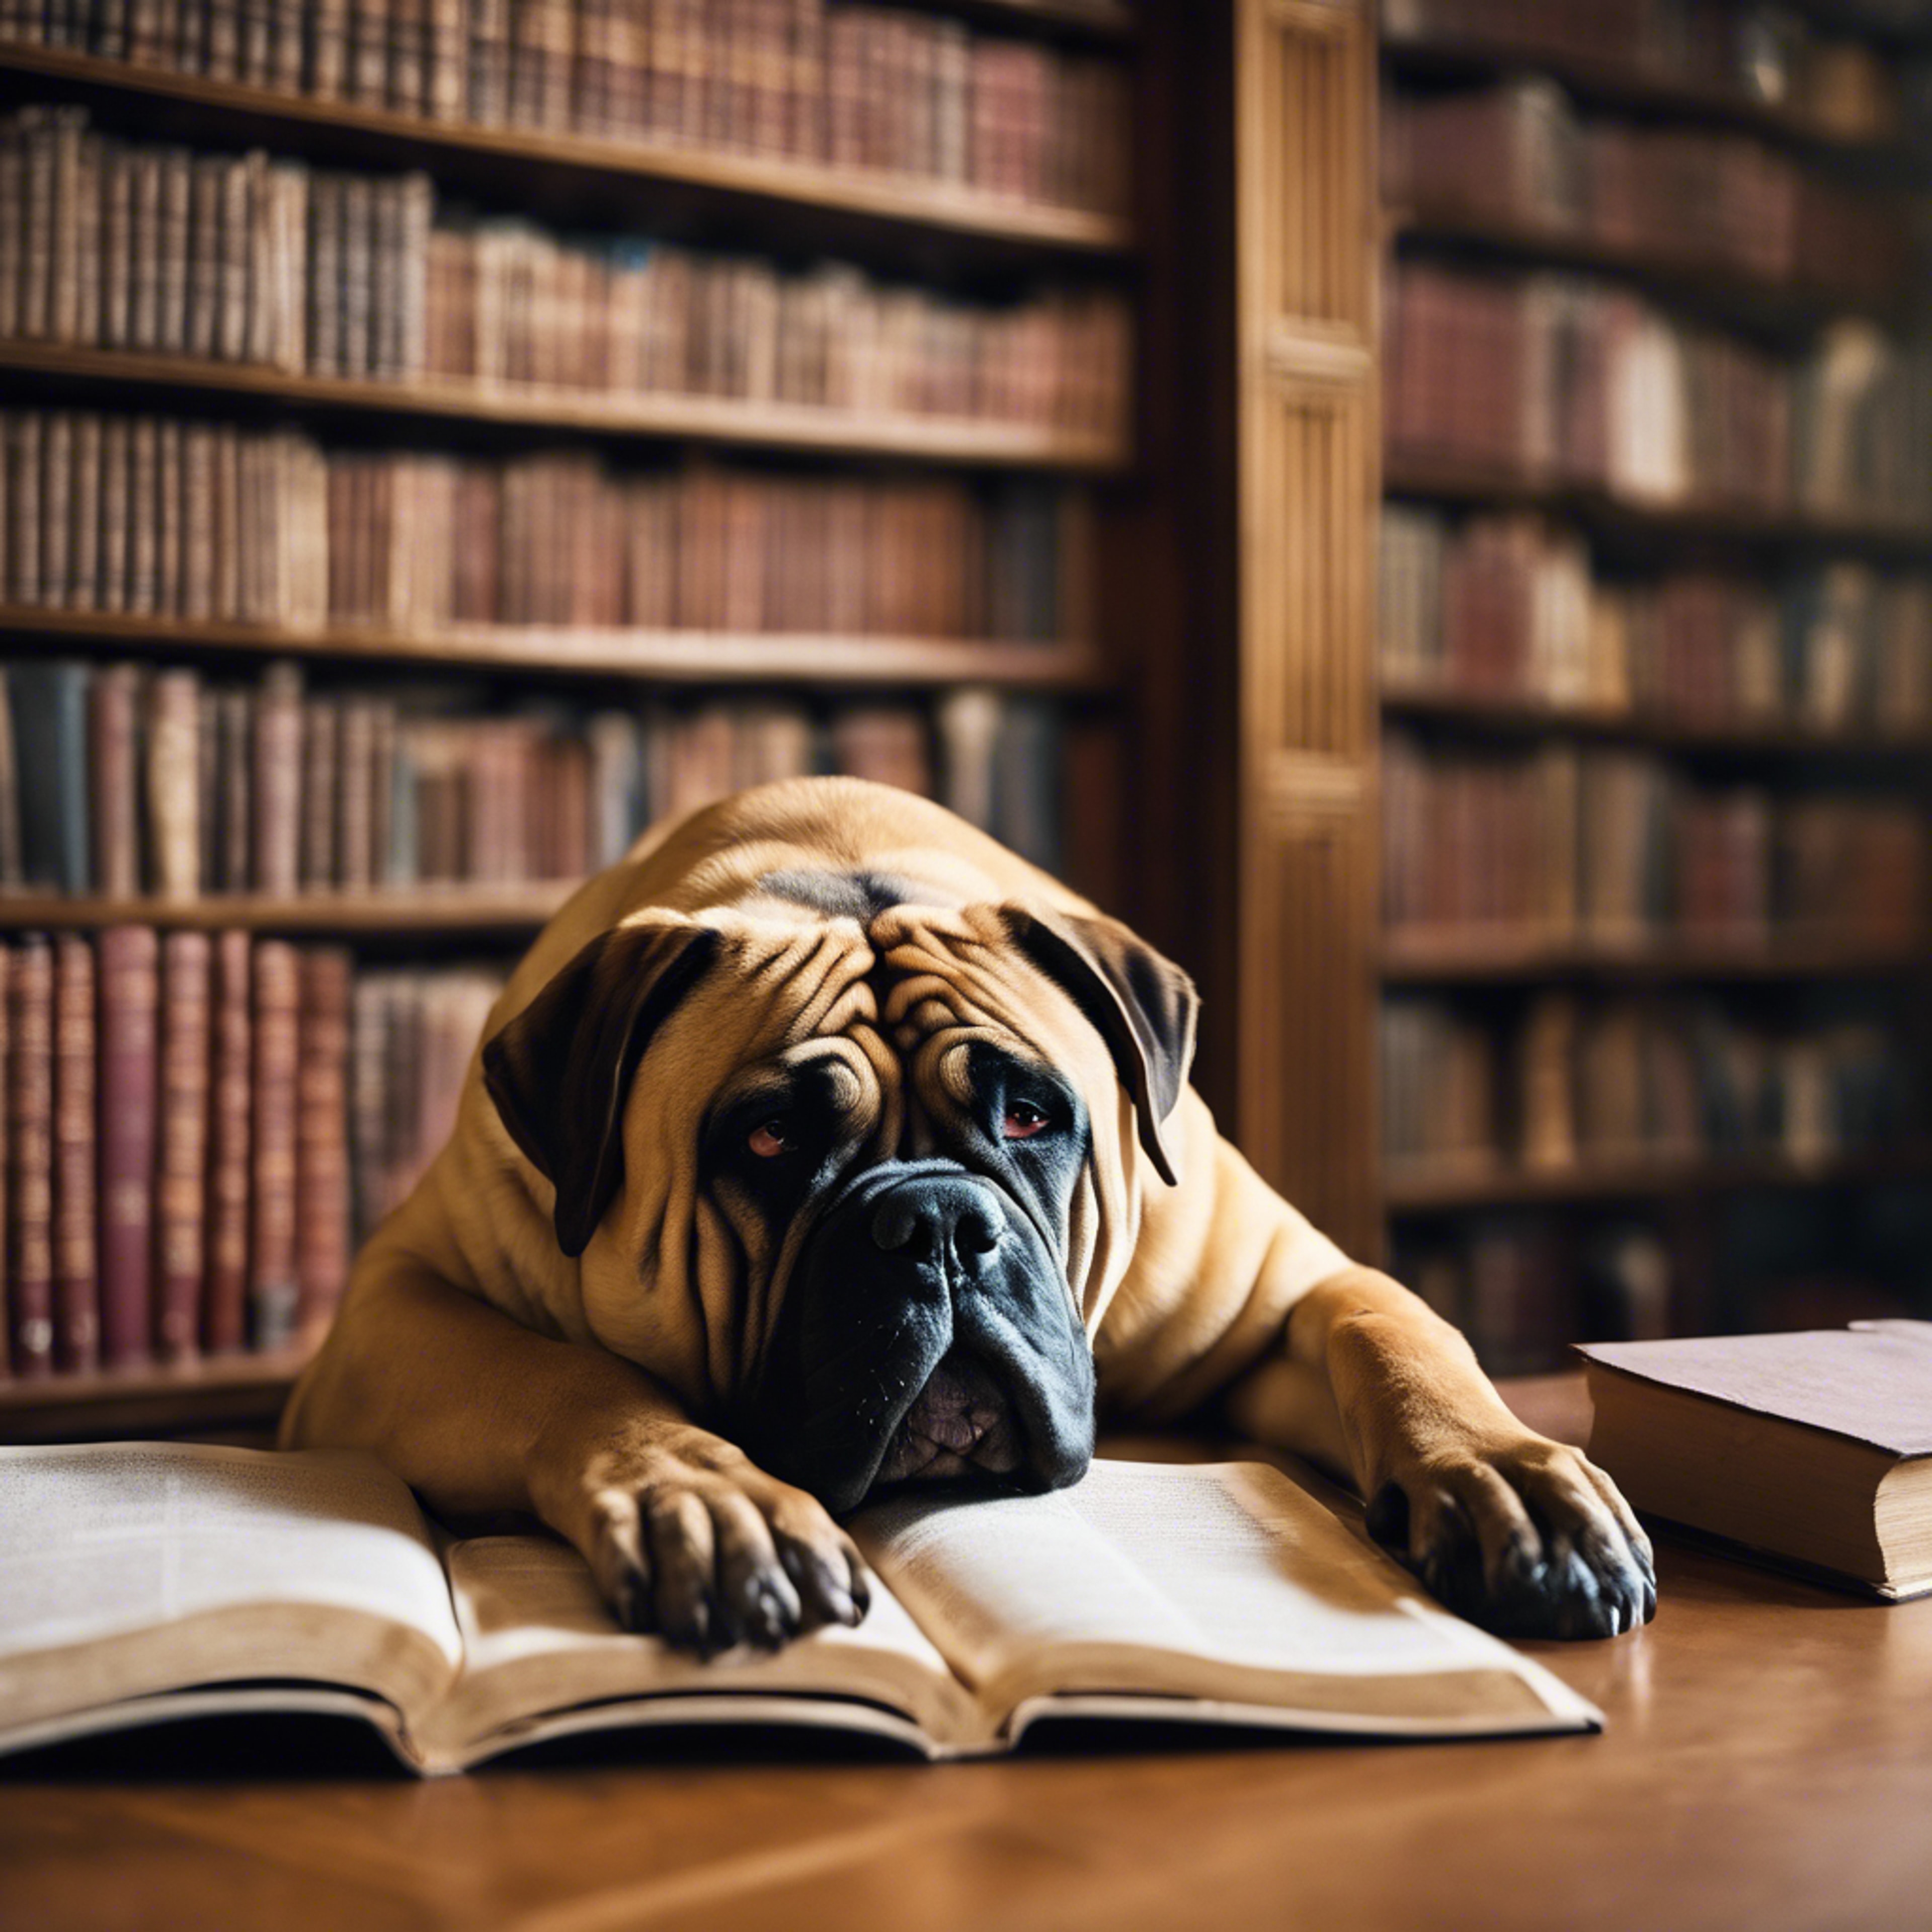 A Bullmastiff snoozing happily in an old English library, a burning fireplace and shelves of books around.壁紙[37bc2afe35d449908a17]